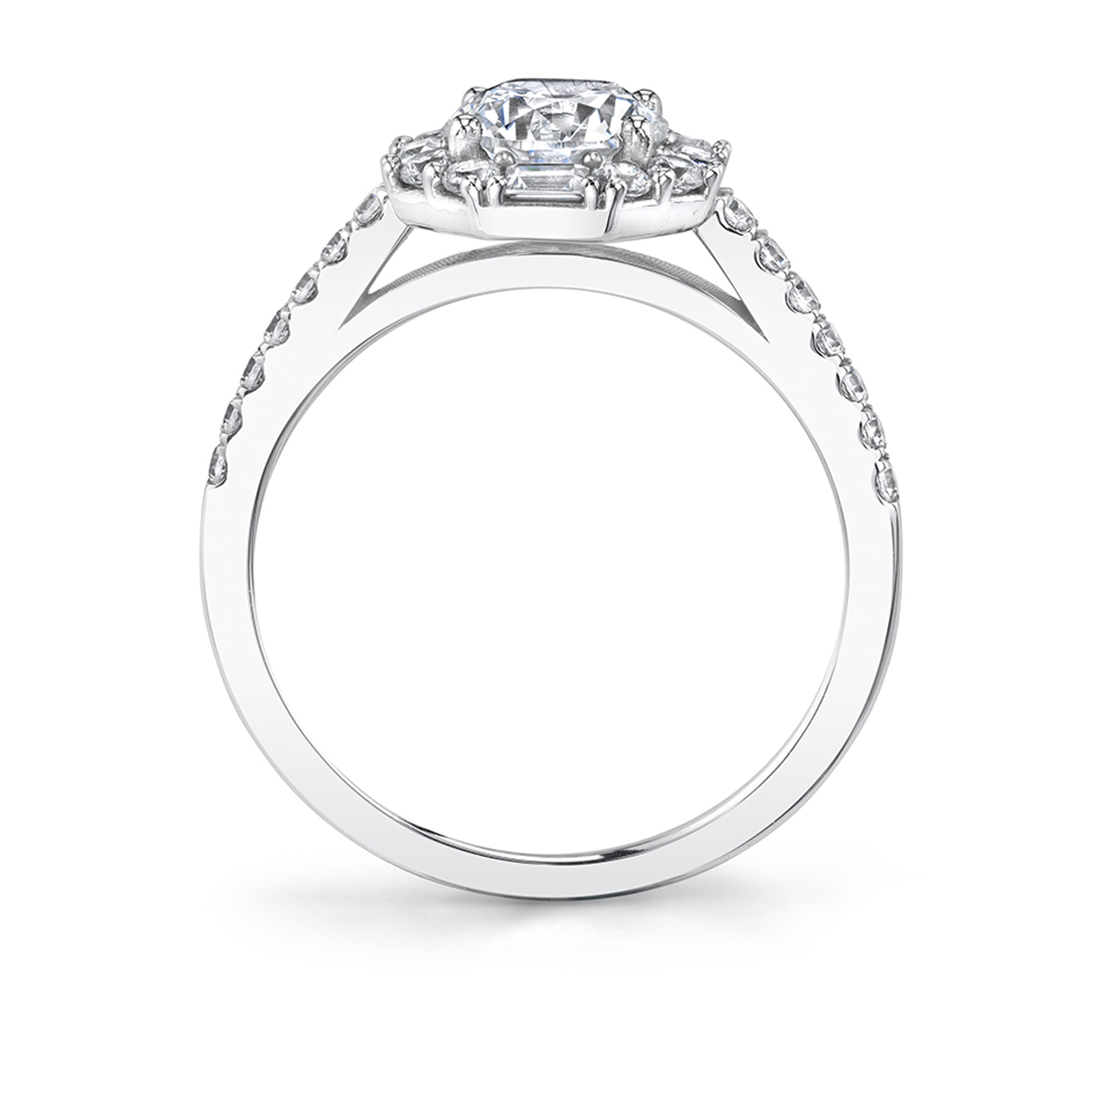 Profile Image of Baguette Halo Engagement Ring in White Gold